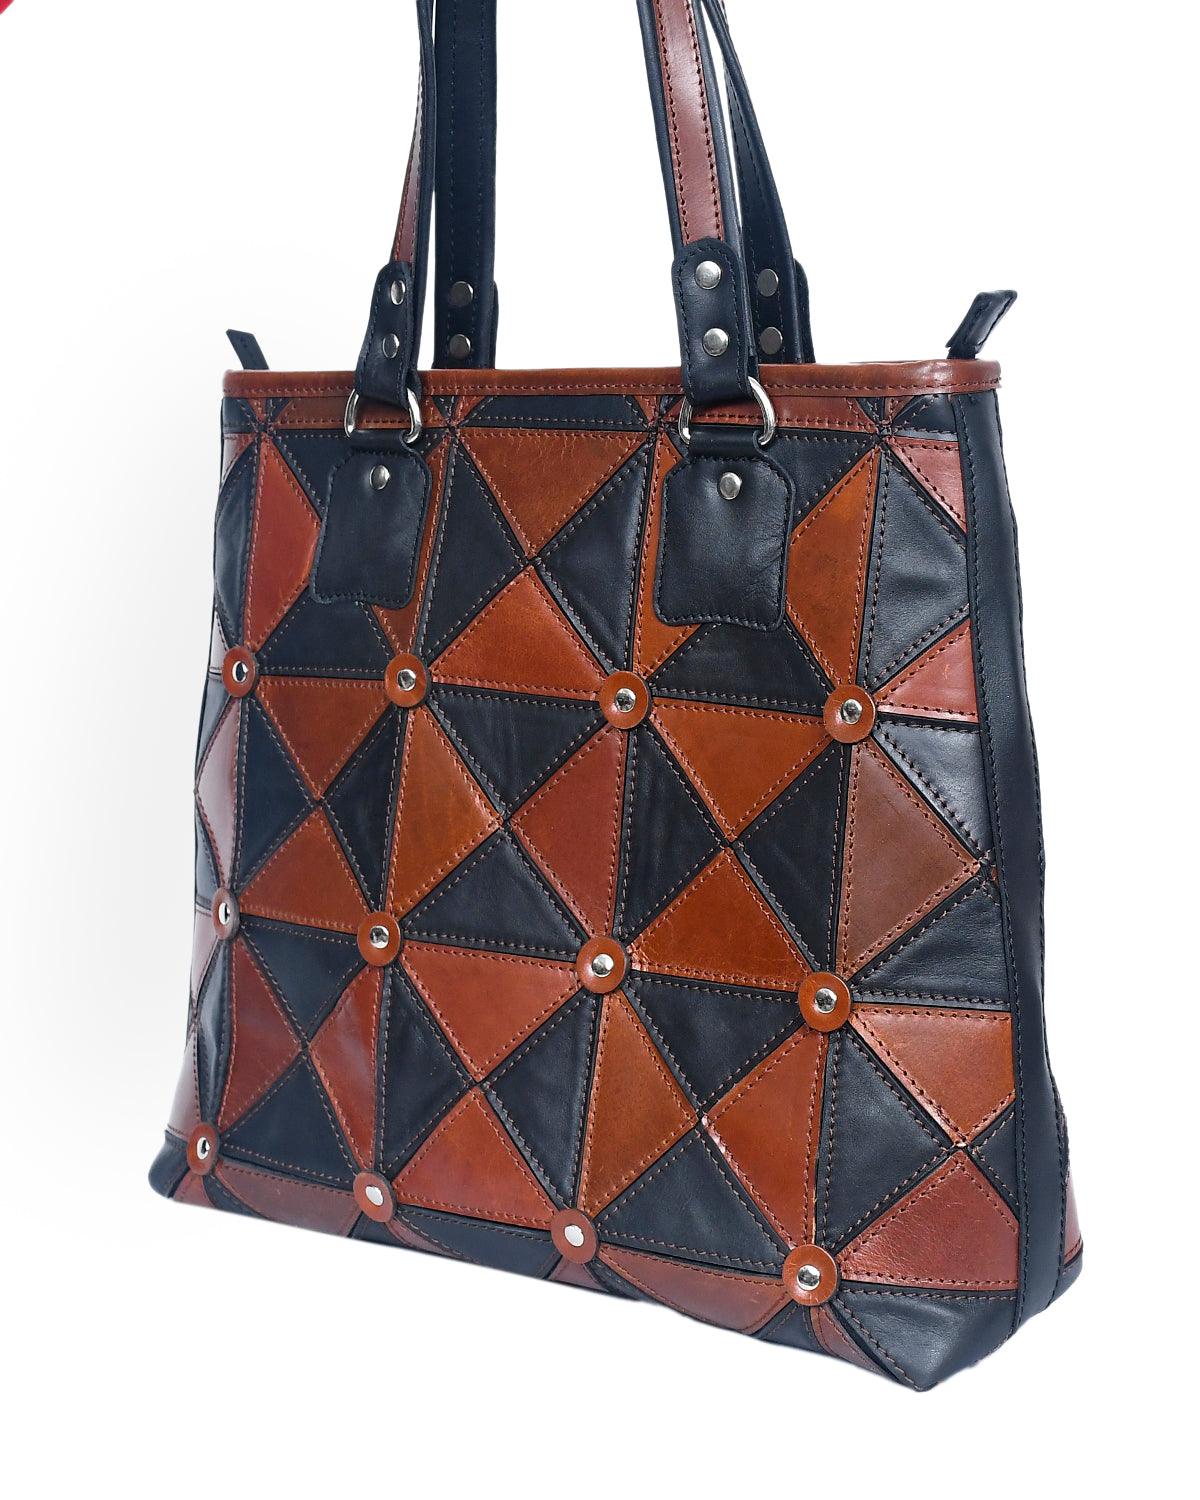 A and S Accessories | Handcrafted Luxury Bags and Accessories Made in India